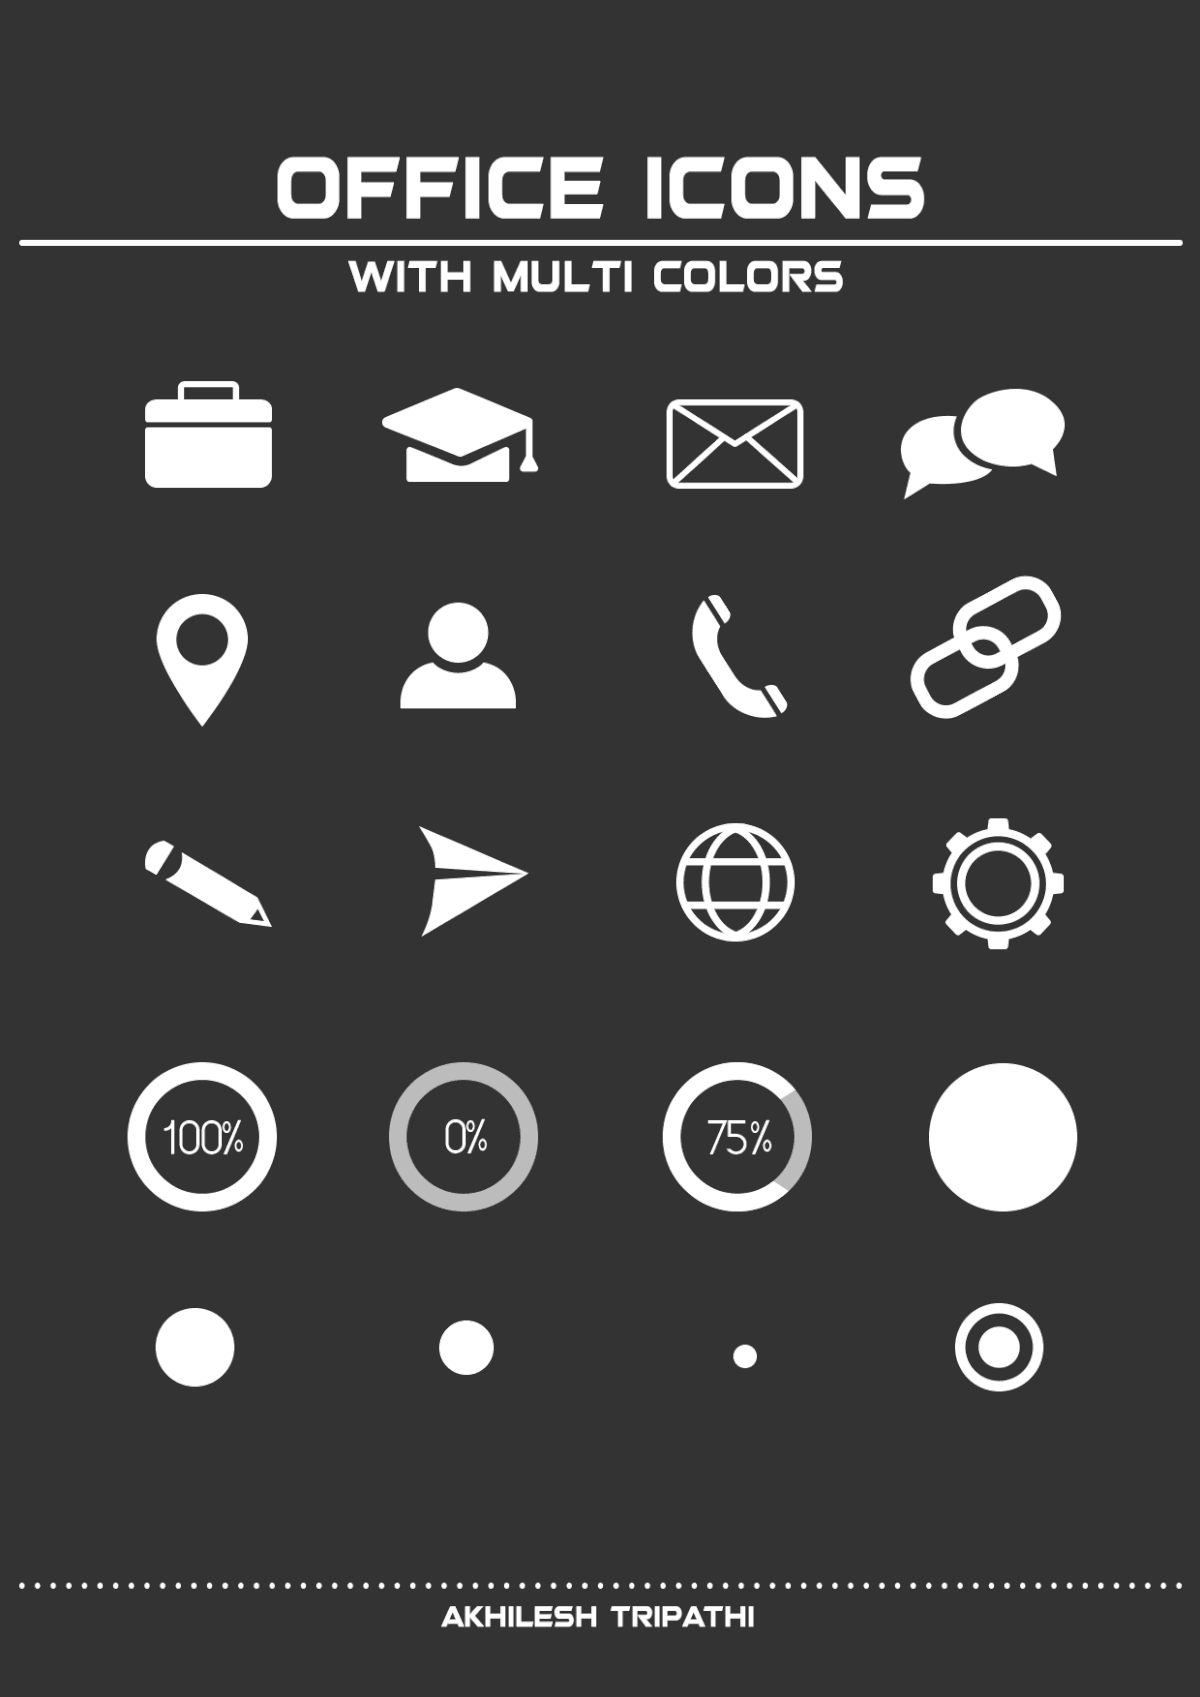 Web apps design UI icons art mobile phone android ios Smart application websites colorful simple